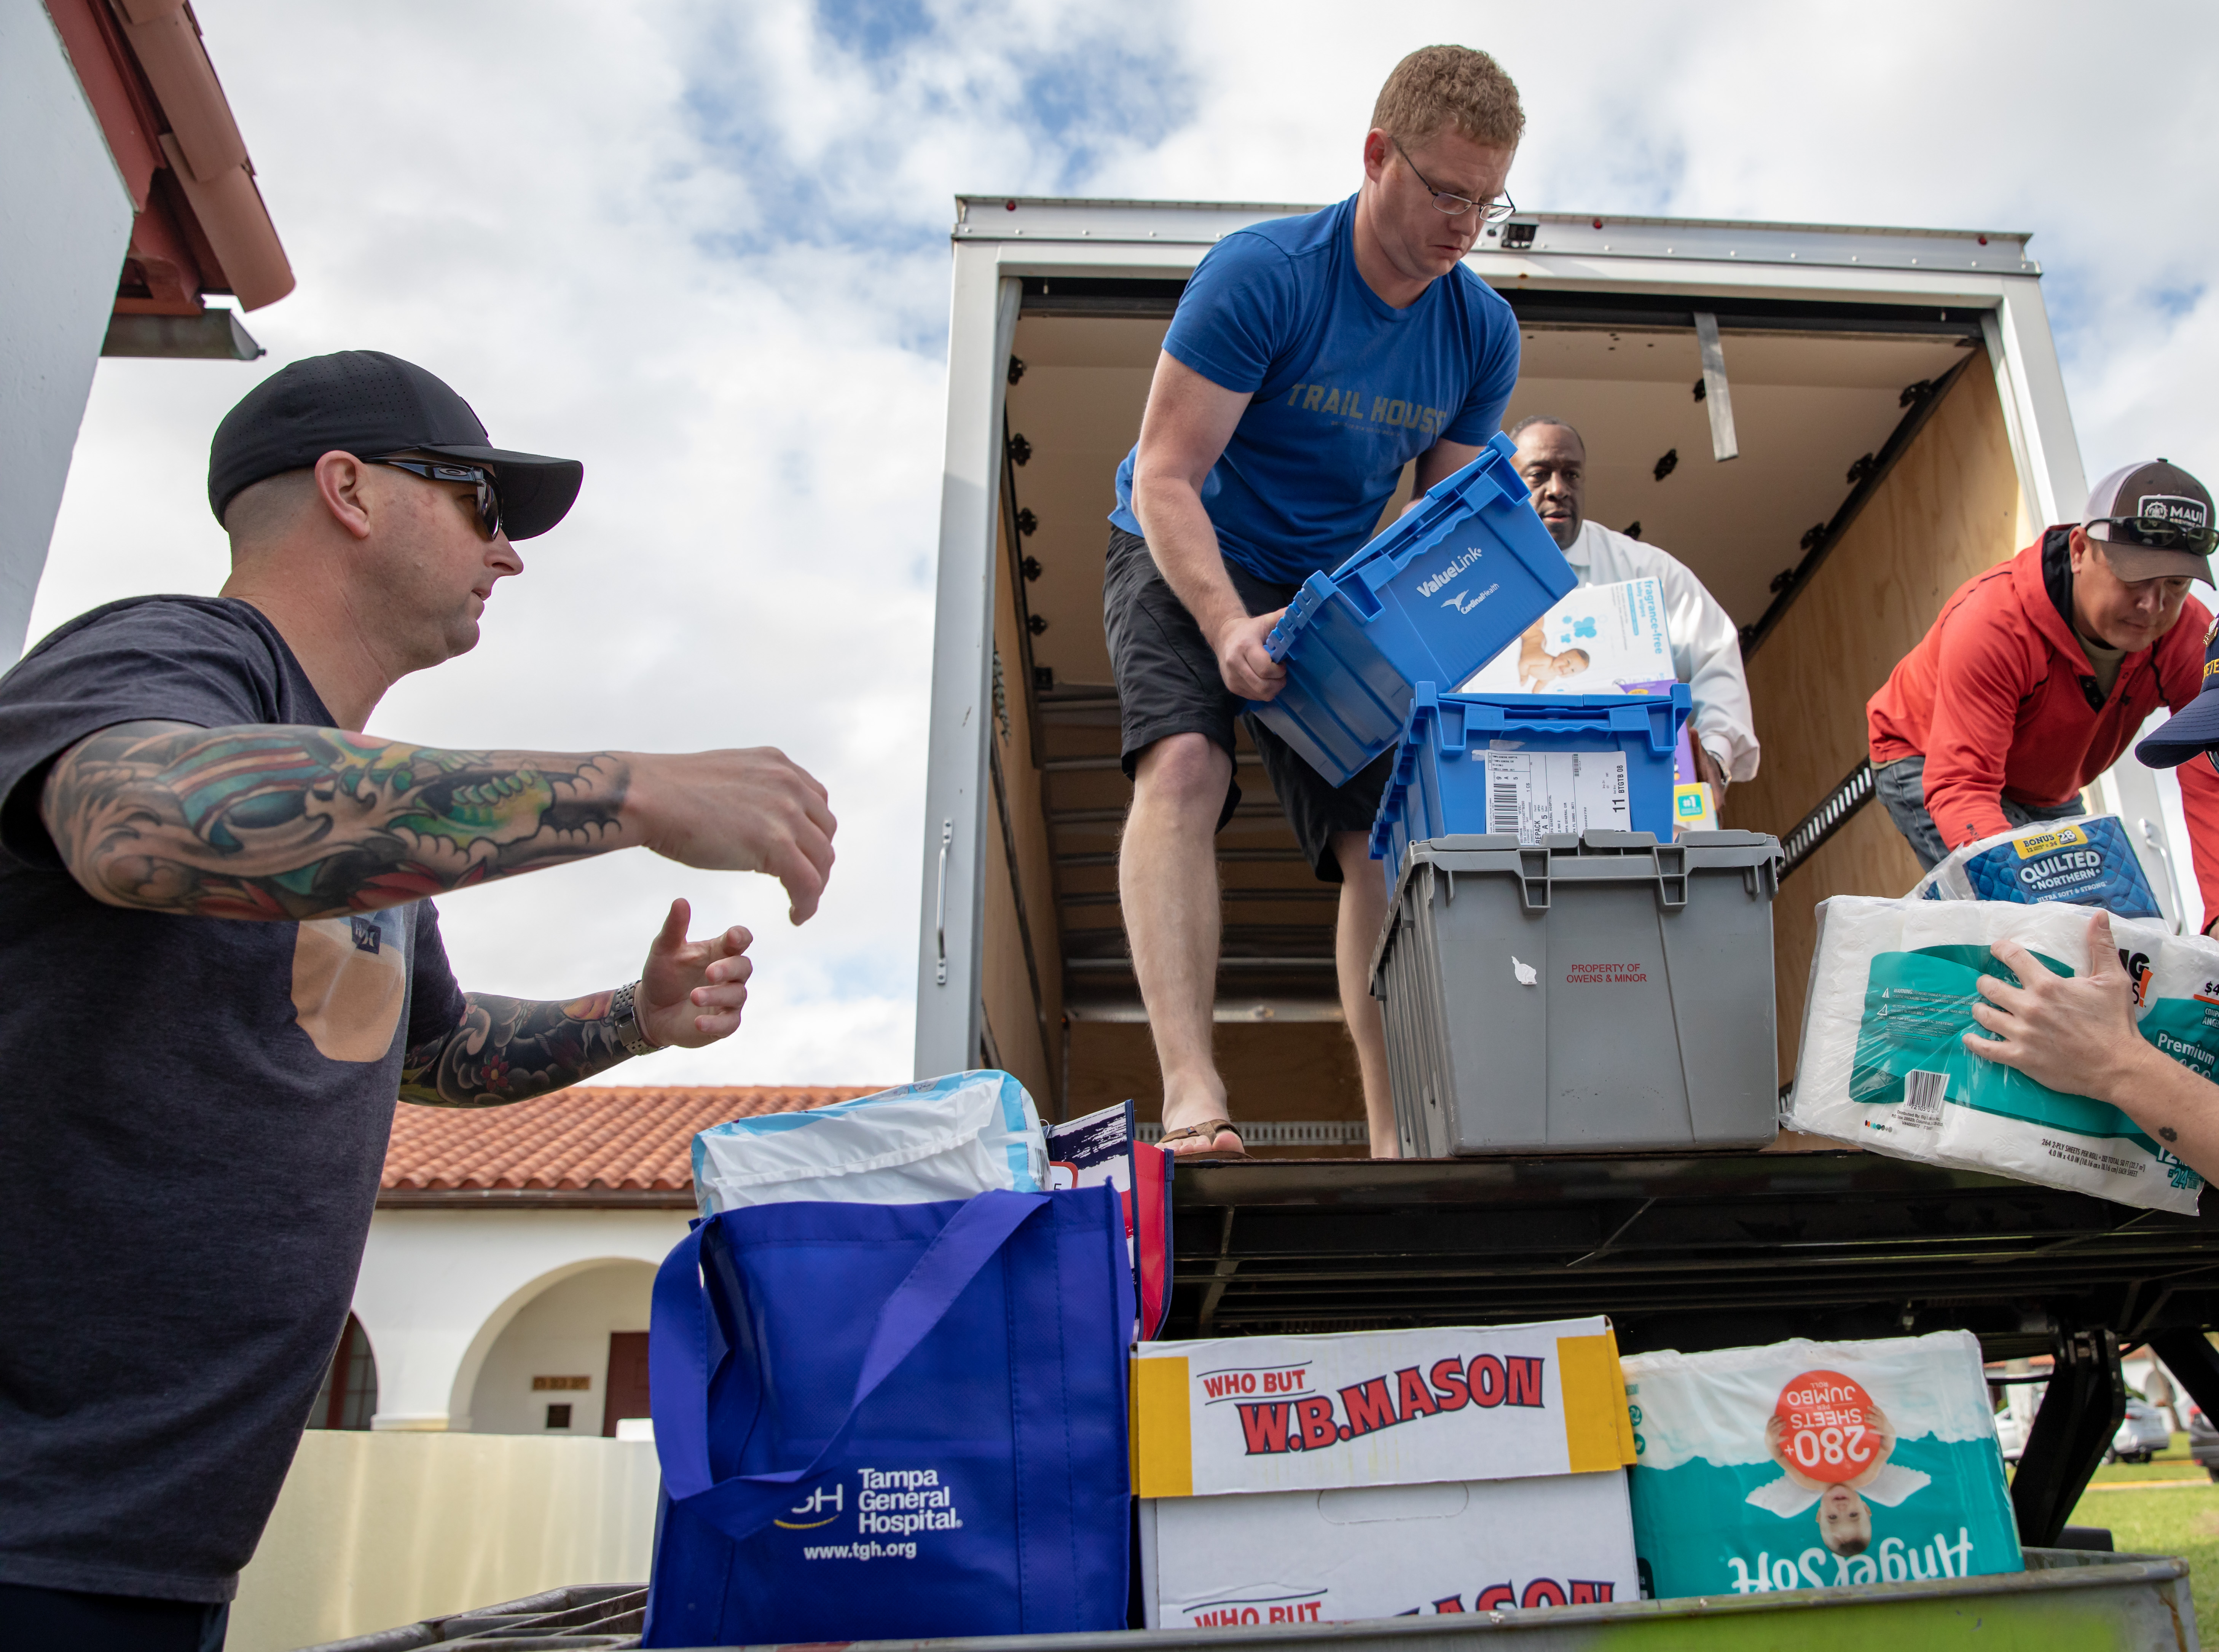 The donated goods arrive at the U.S. Coast Guard Base in St. Petersburg.